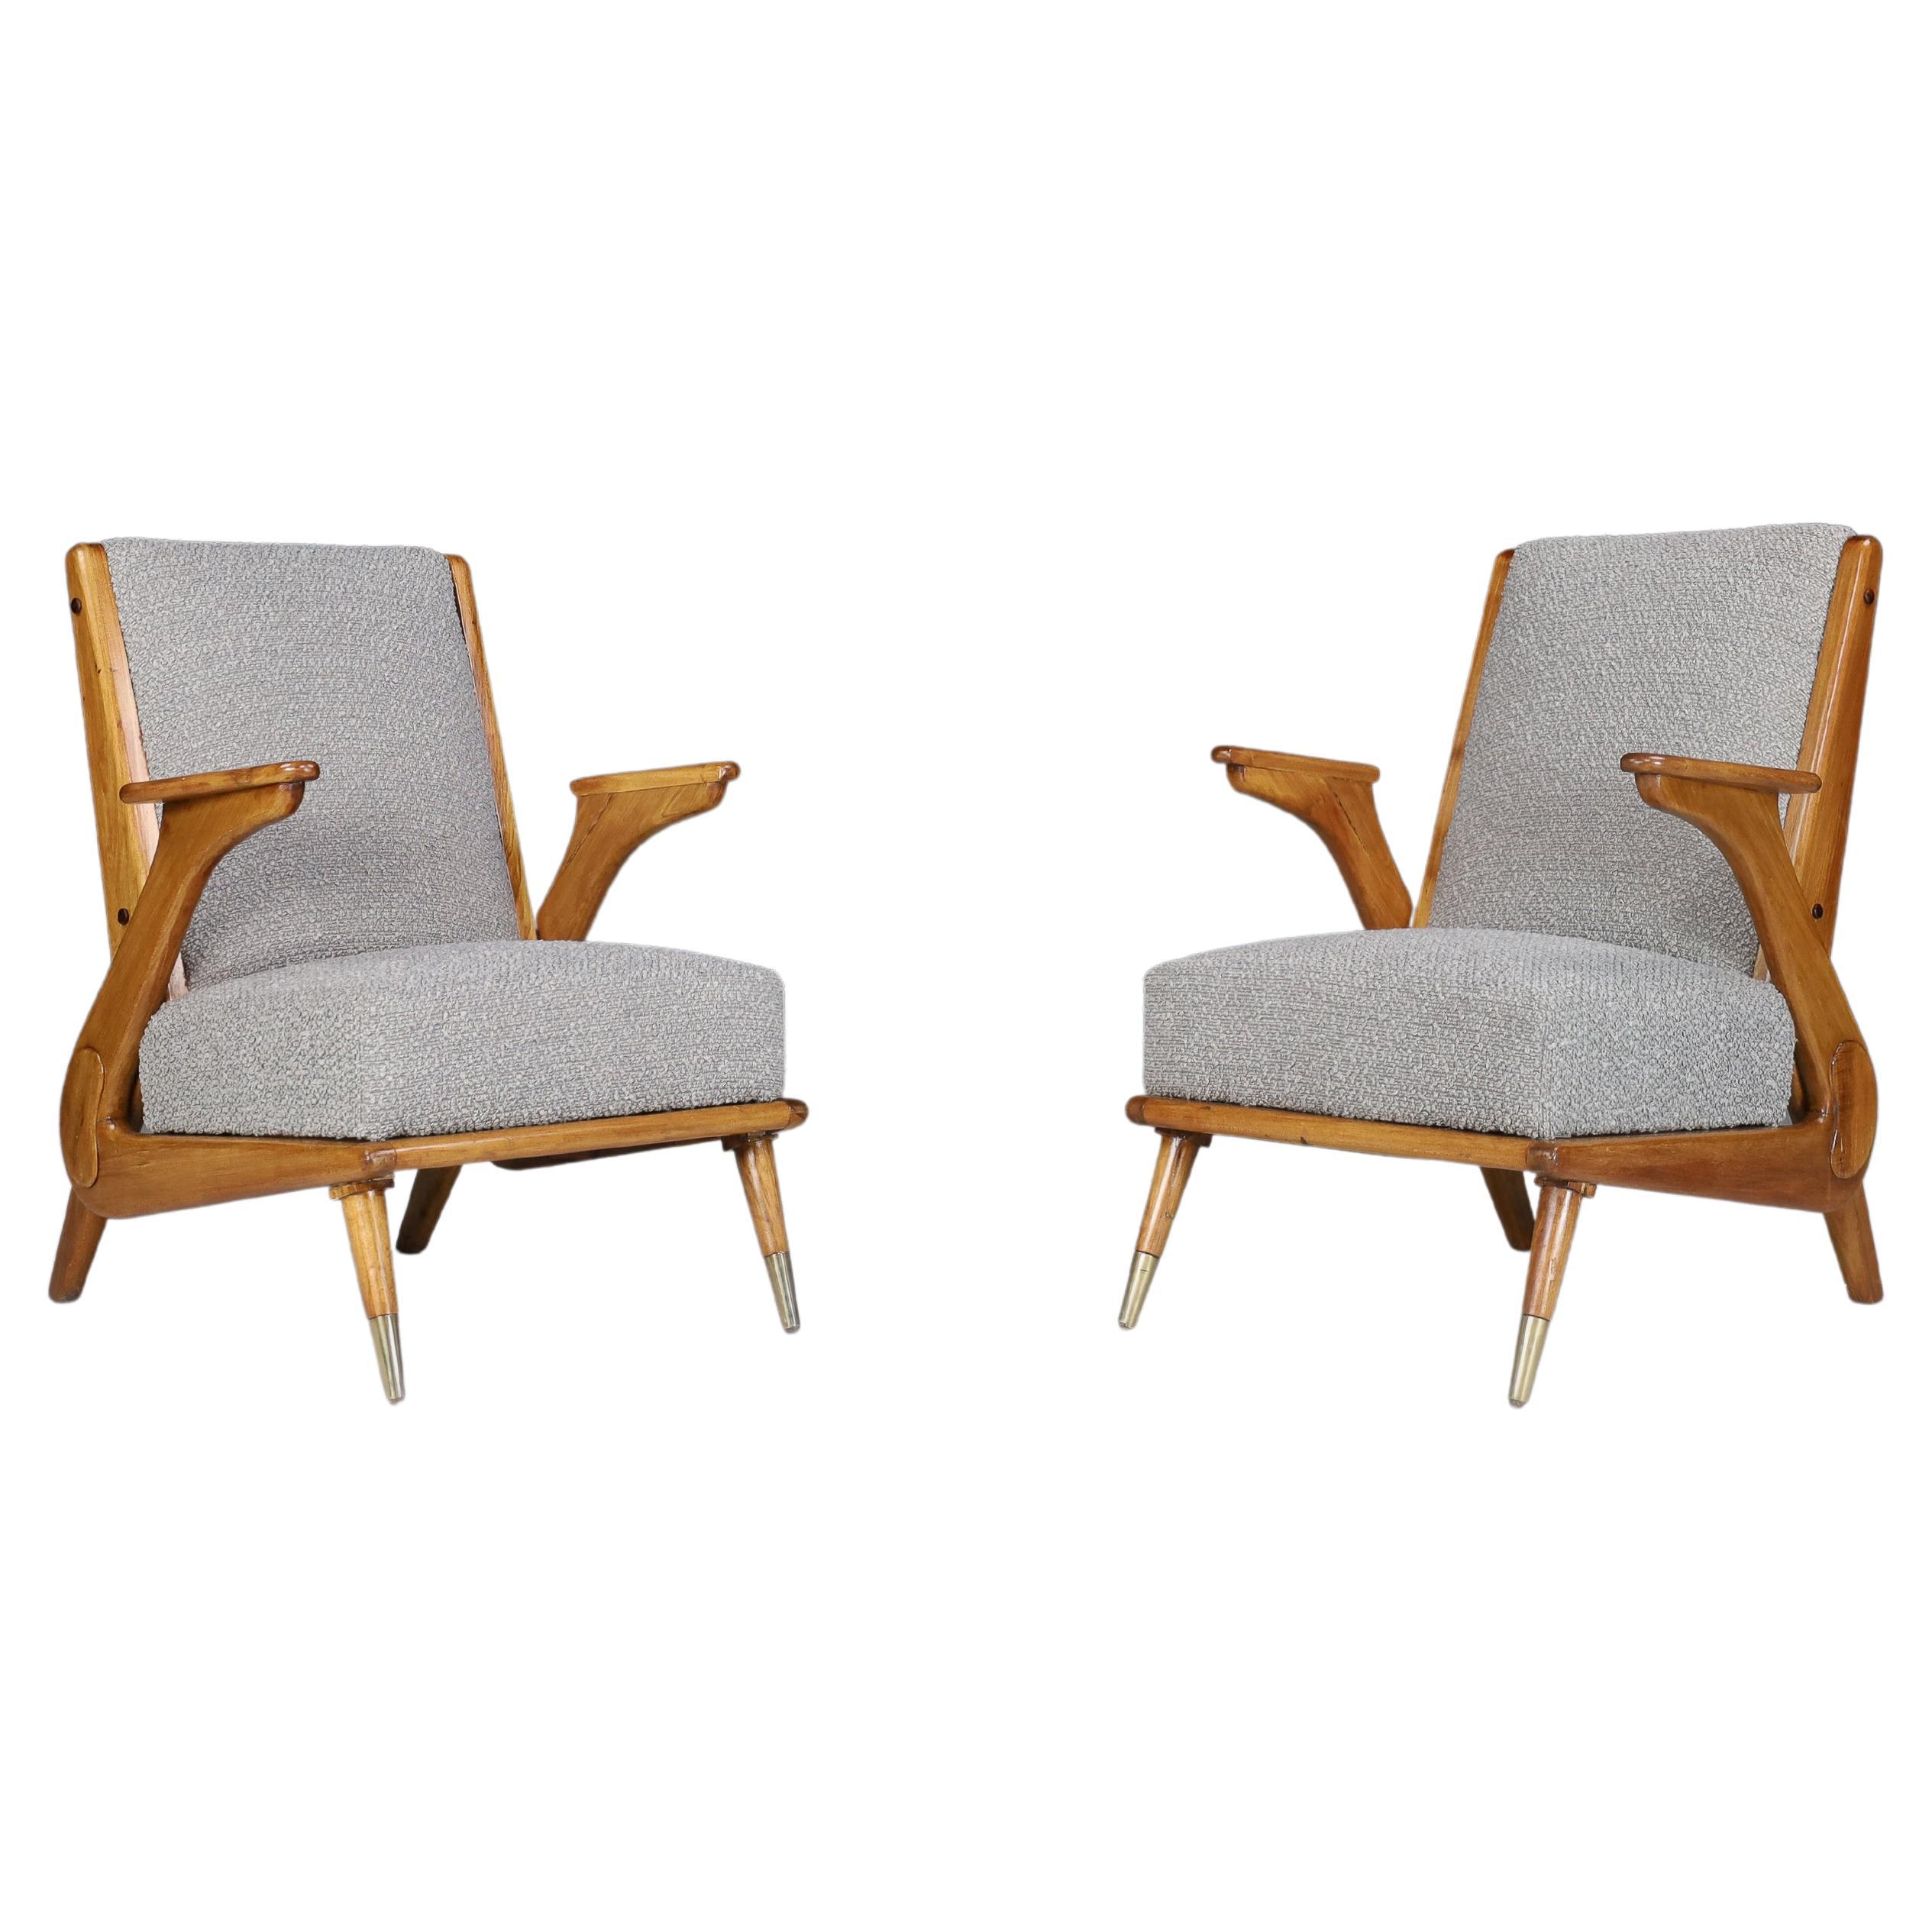 Elegant Pair of Italian Armchairs Attributed to Giuseppe Scapinelli 1950s